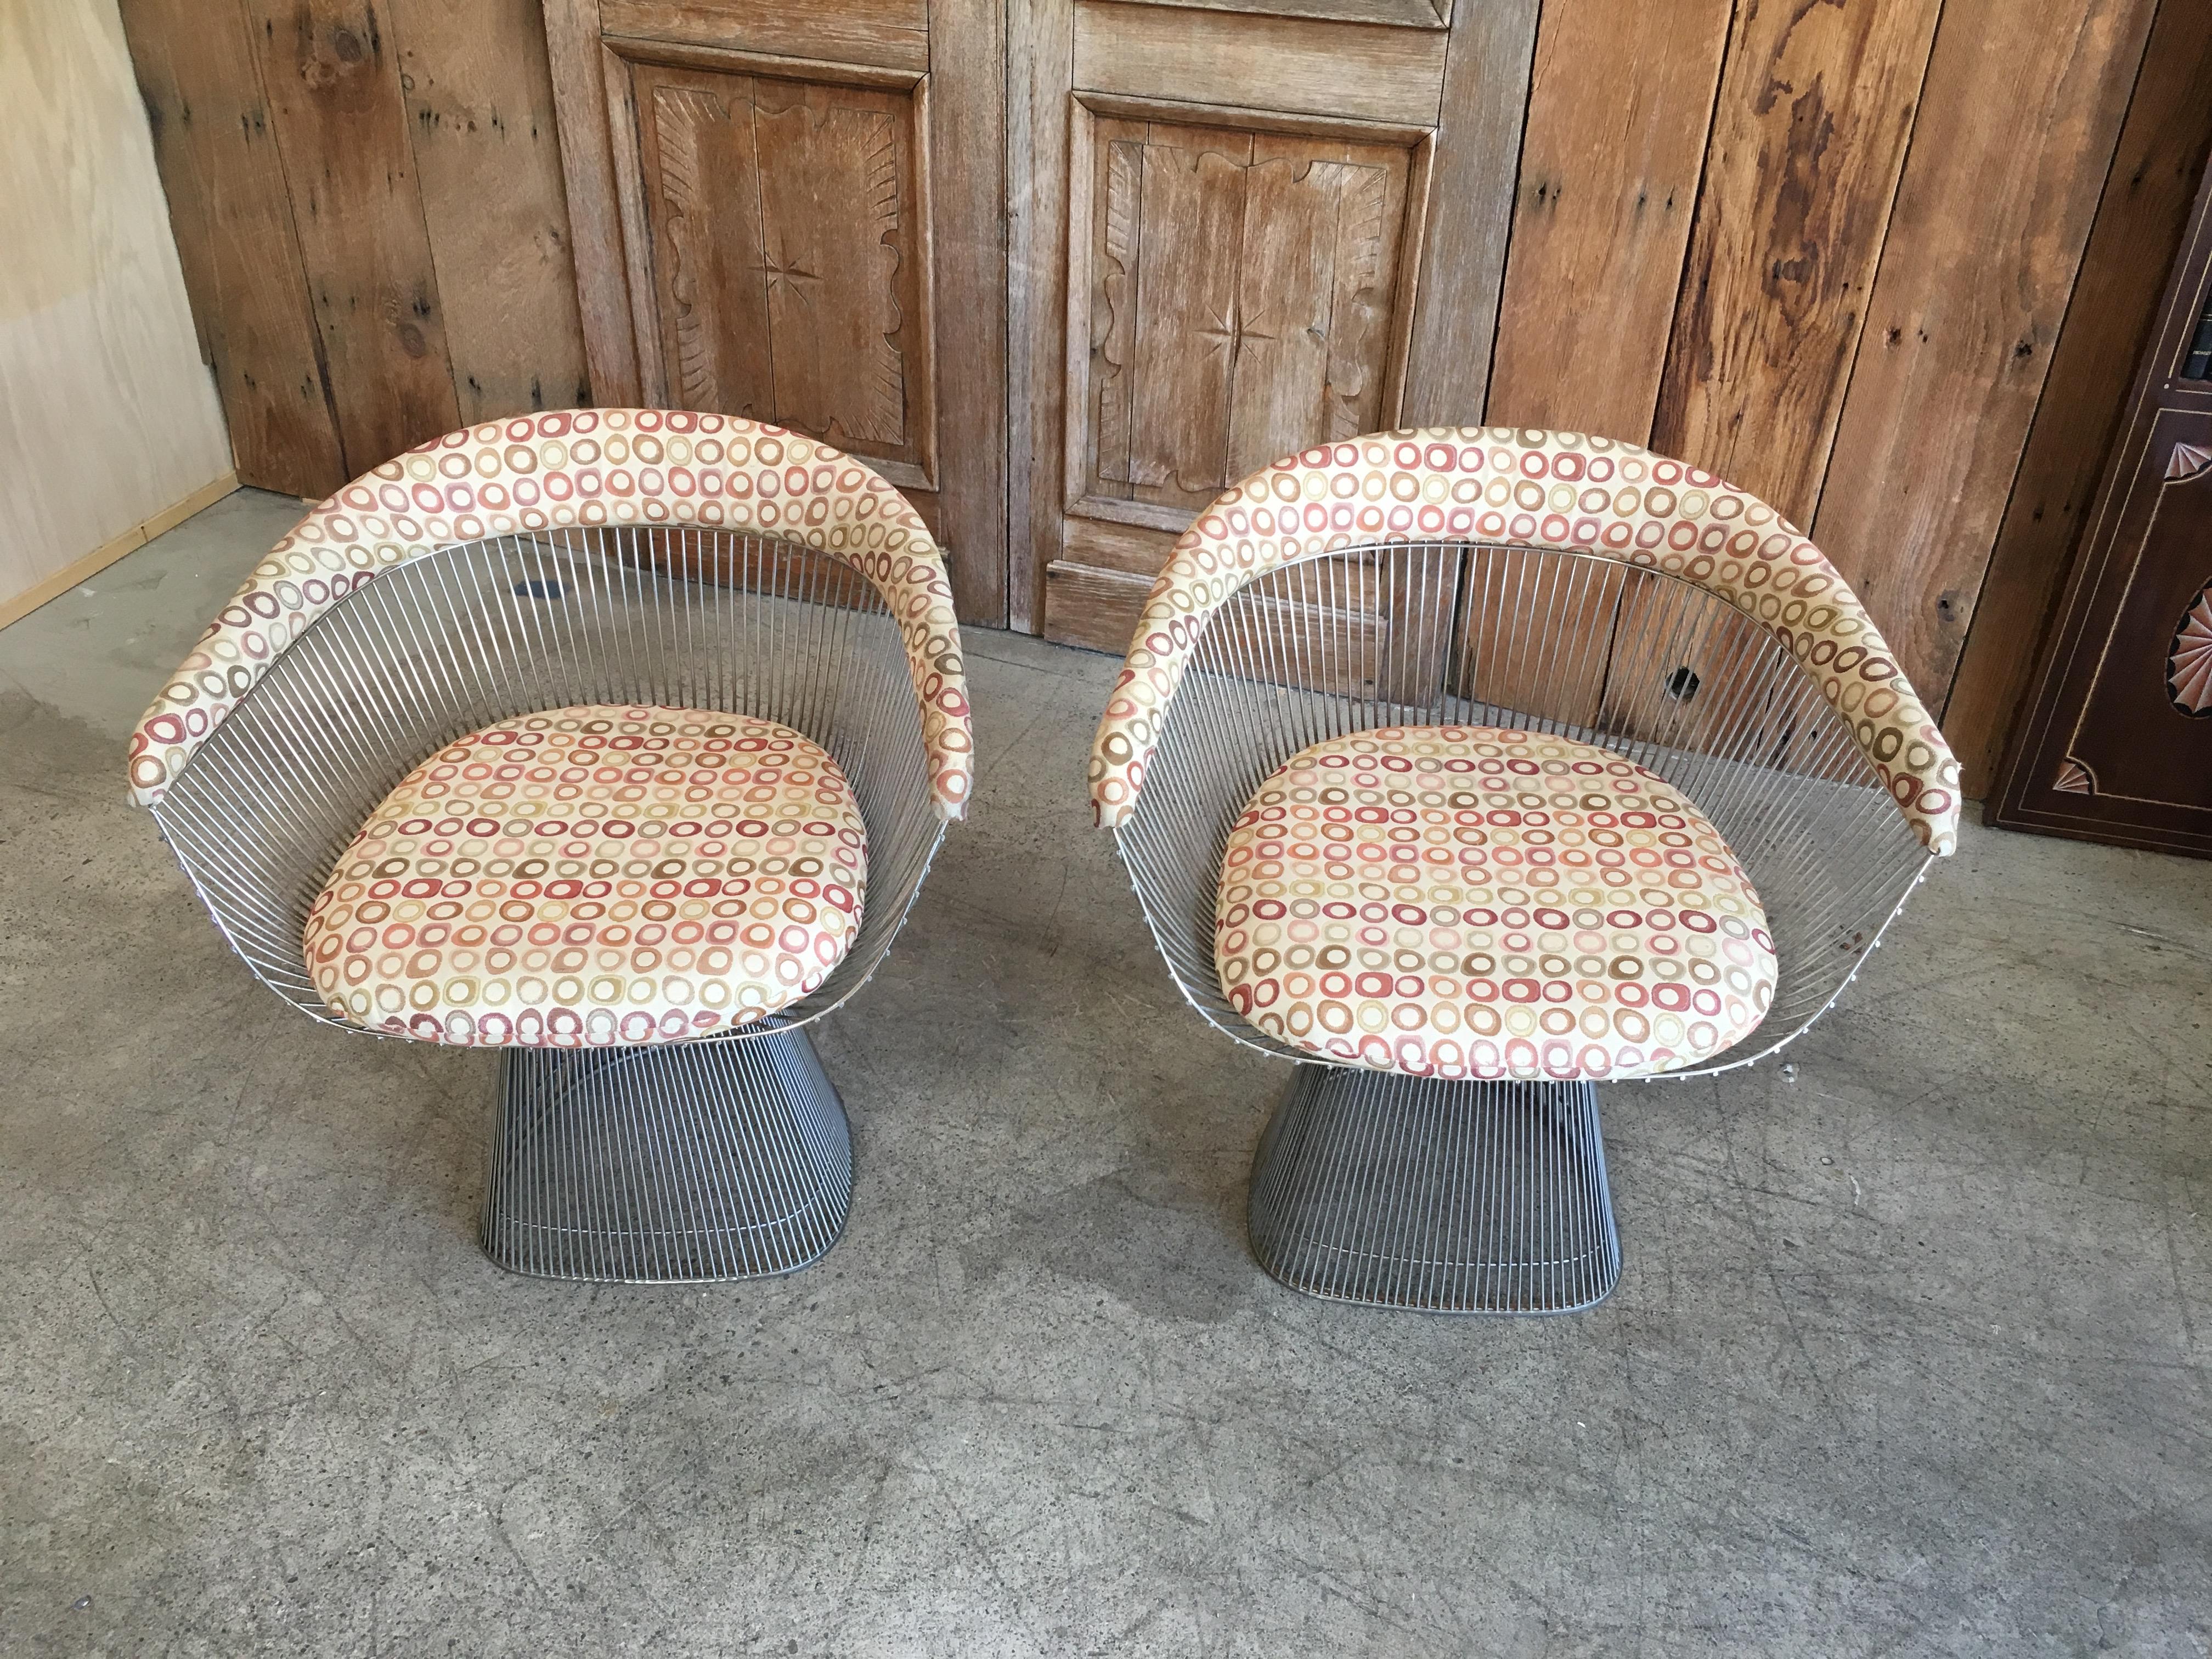 American Set of Two Midcentury Chairs by Warren Platner for Knoll Chairs